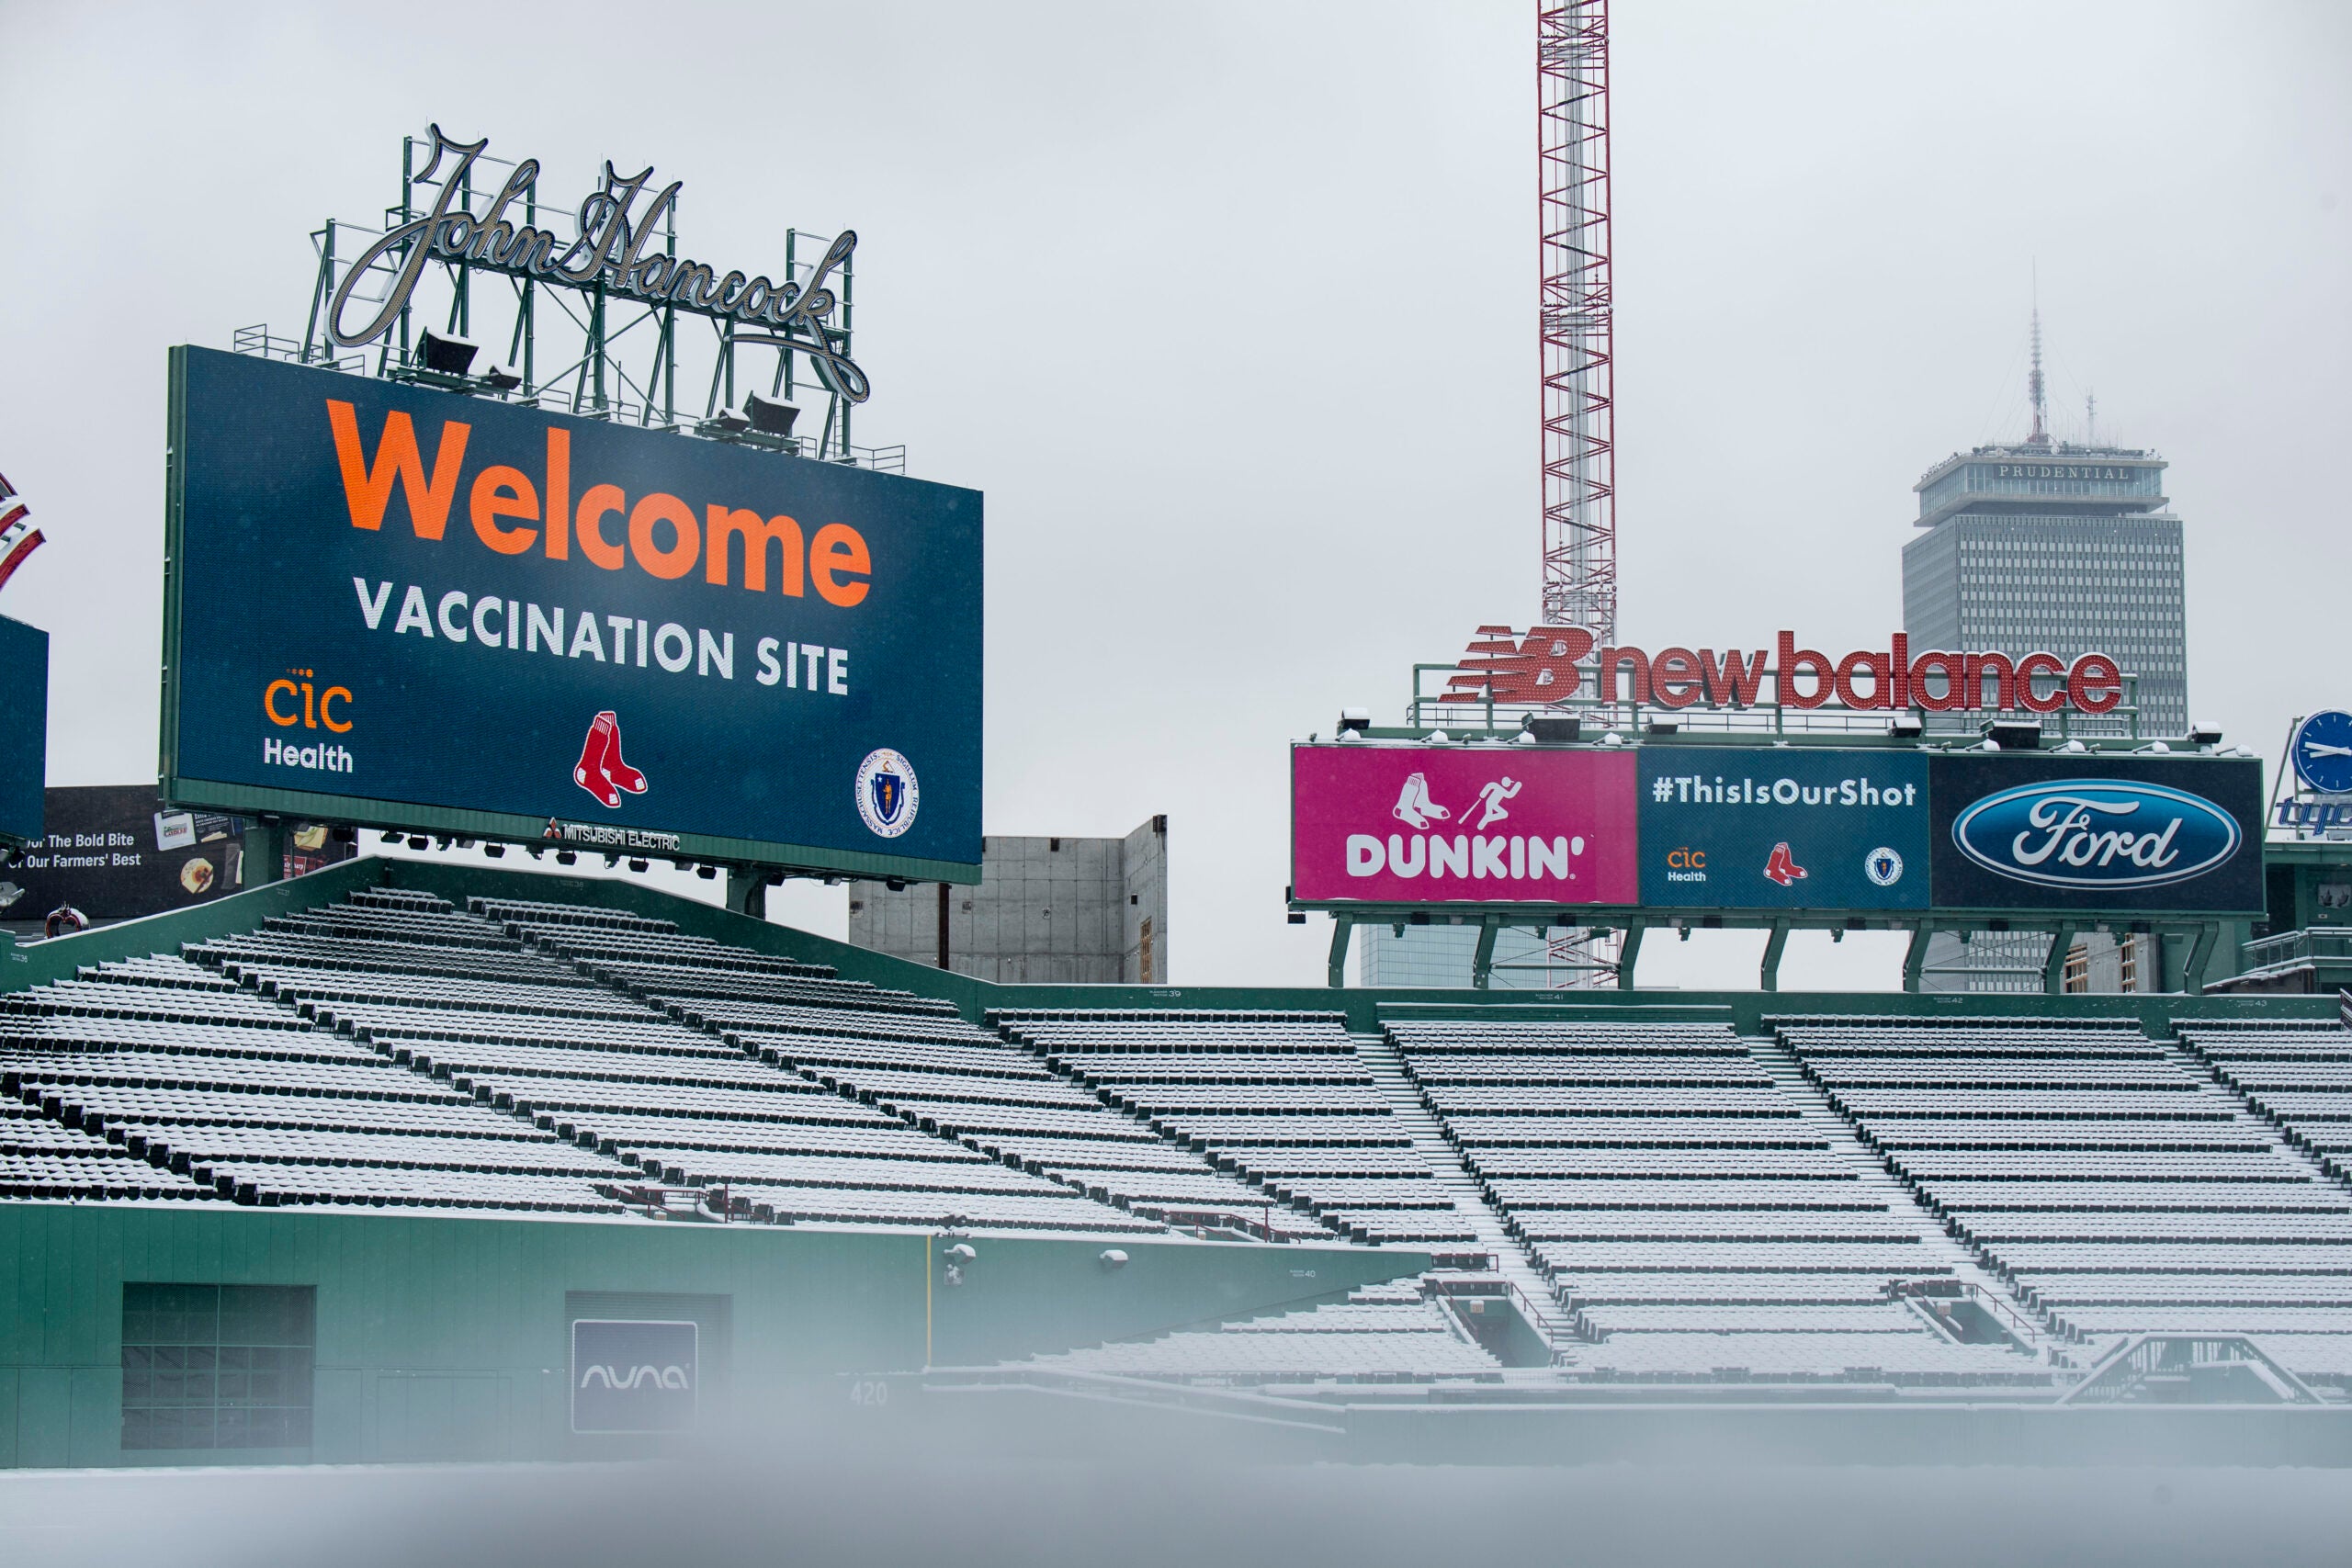 Fenway Park mass COVID-19 vaccination site now open